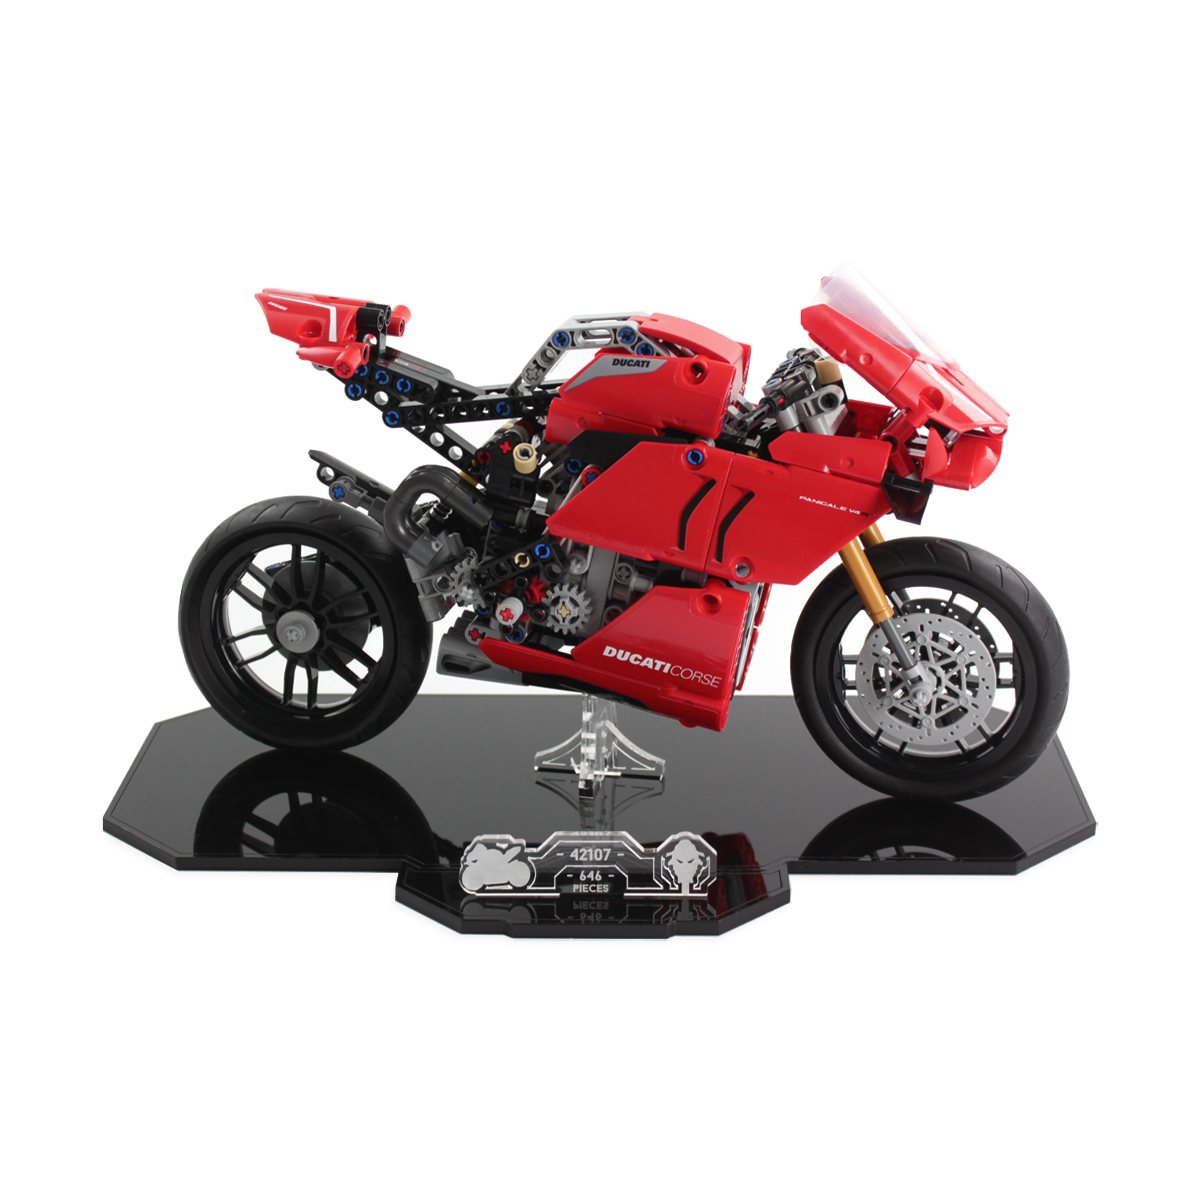 Display stand for LEGO® Technic: Ducati Panigale V4 R (42107) — Wicked Brick